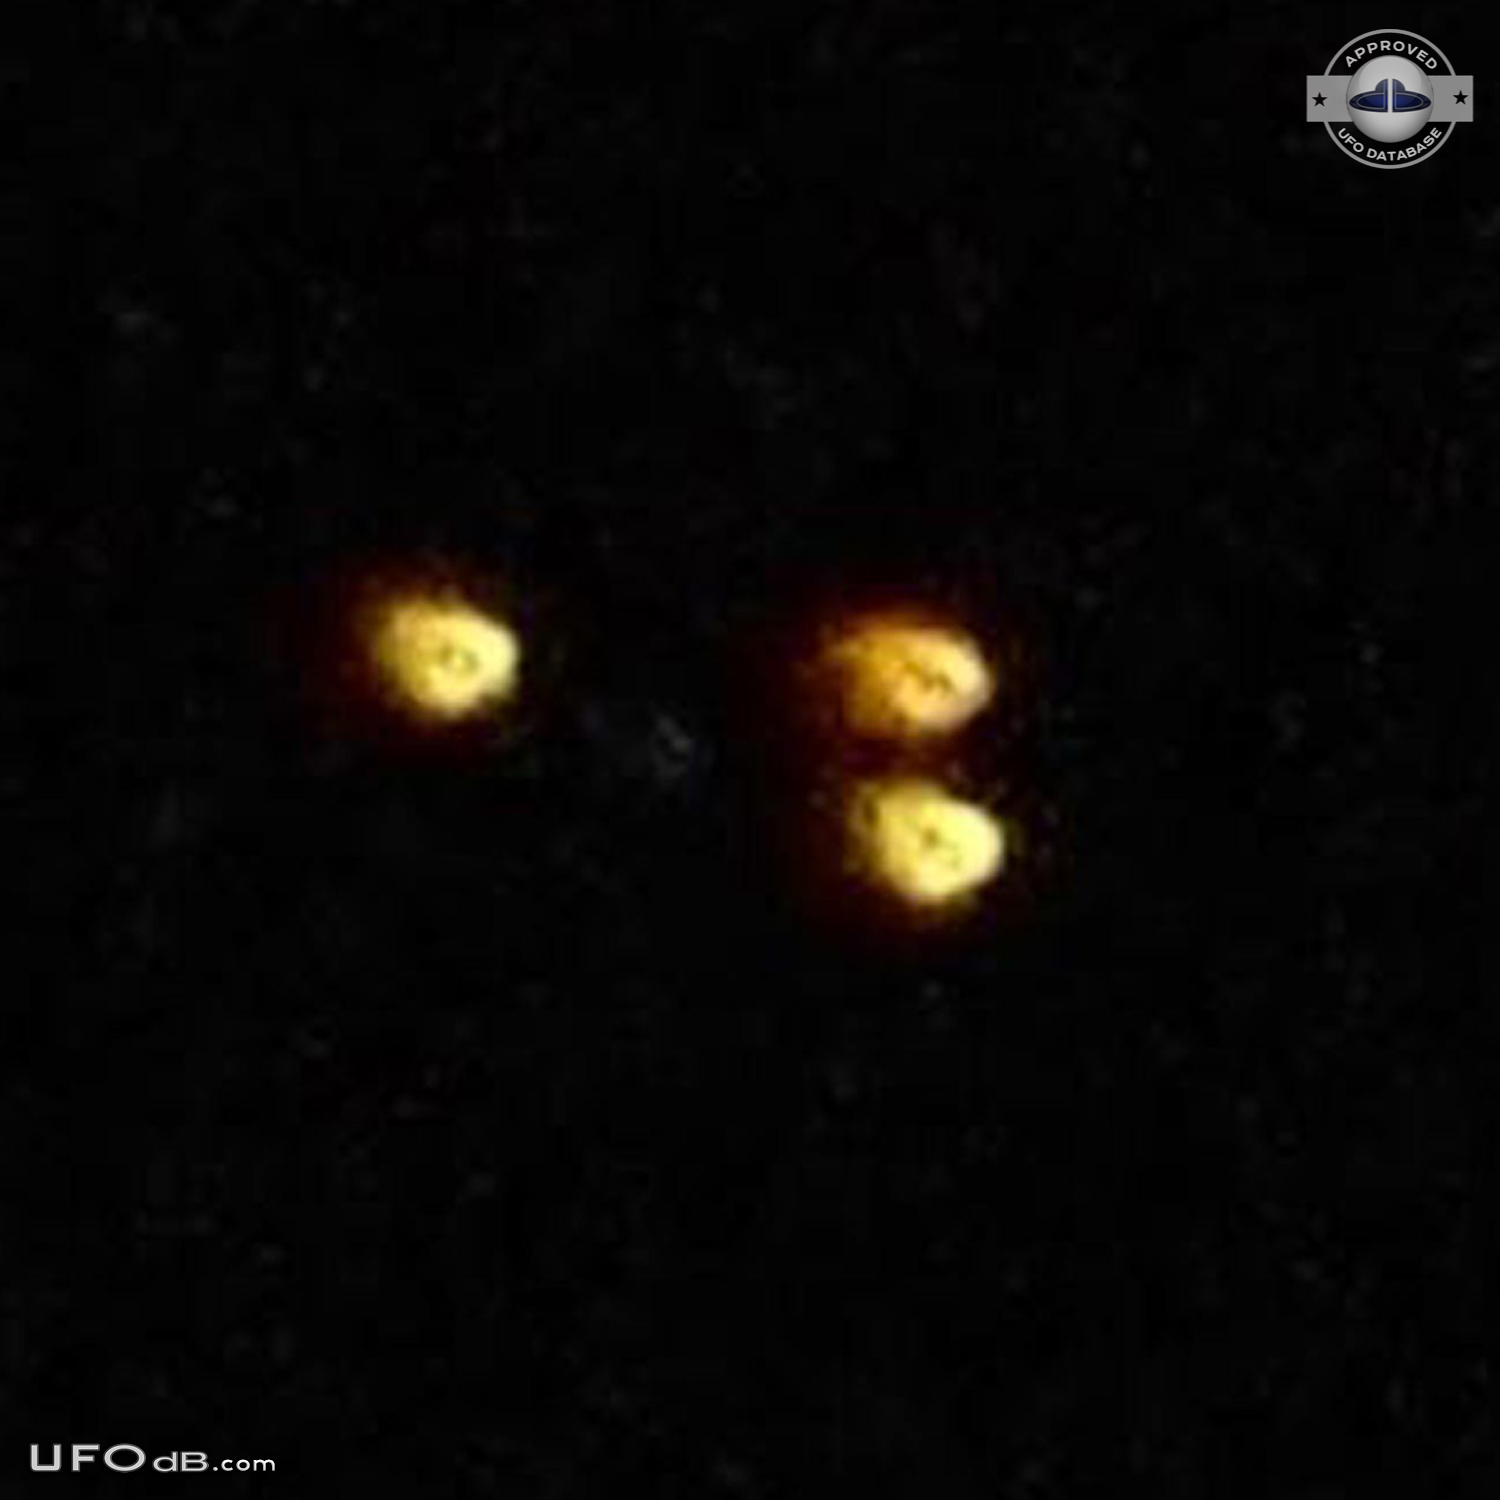 UFO picture with 3 firebals in a triangular formation - Argentina 2011 UFO Picture #408-2